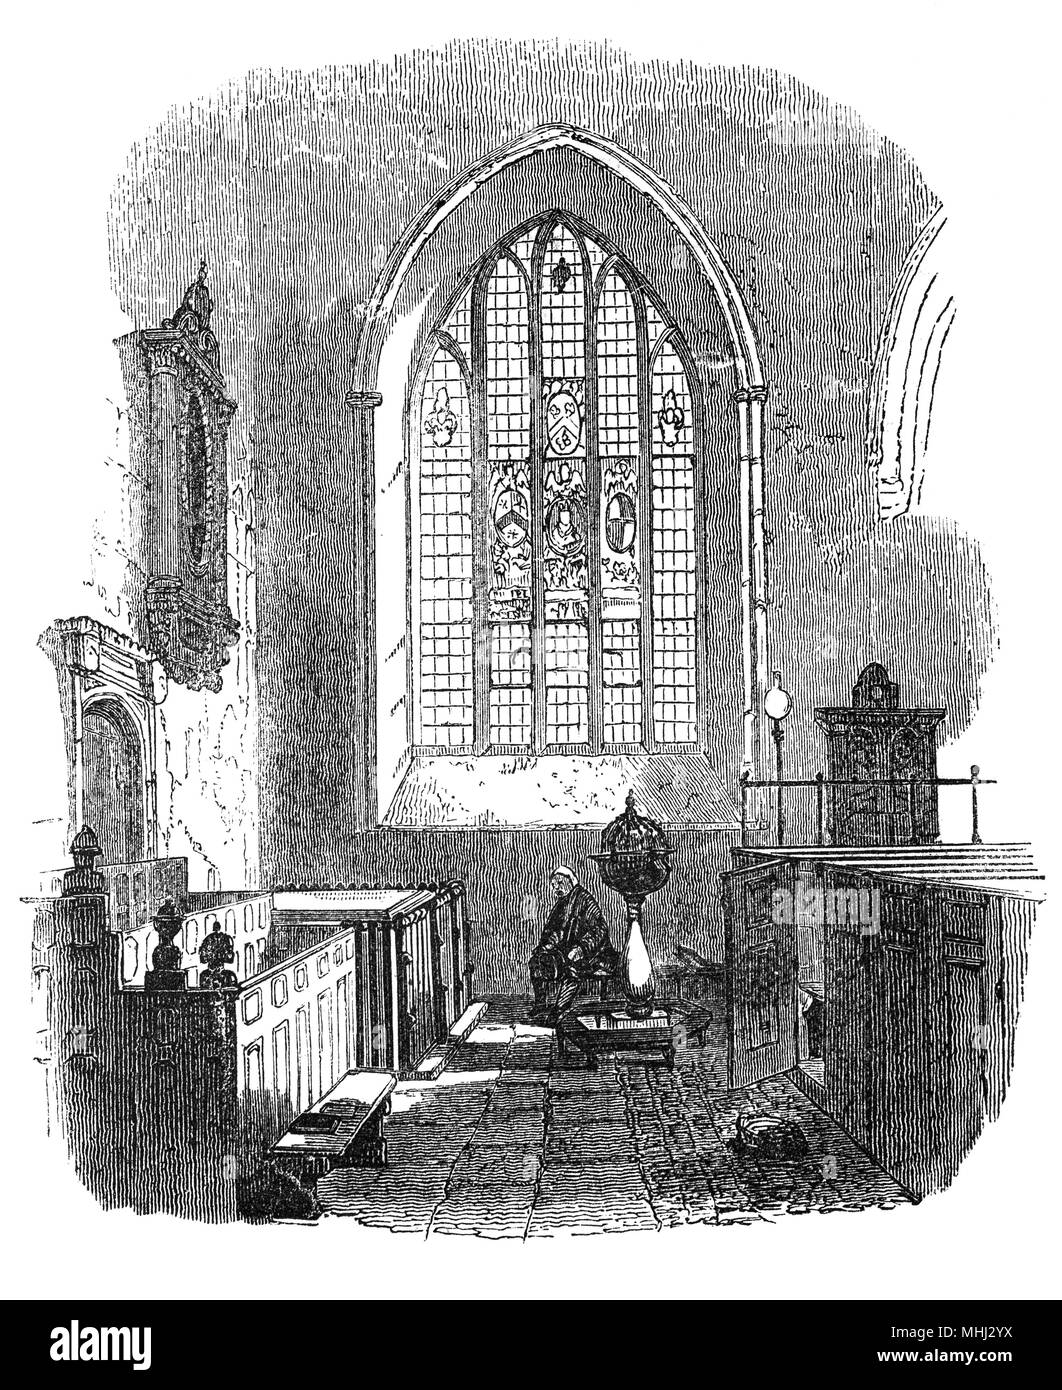 Then interior of St Helen's,  an evangelical Anglican church located off Bishopsgate in London. It  contains more monuments than any other church in Greater London except Westminster Abbey and was the parish church of William Shakespeare when he lived in the area in the 1590s.  The church of St Helen dates from the 12th century and a priory of Benedictine nuns was founded there in 1210. It is the only building from a nunnery to survive in the City of London. Stock Photo